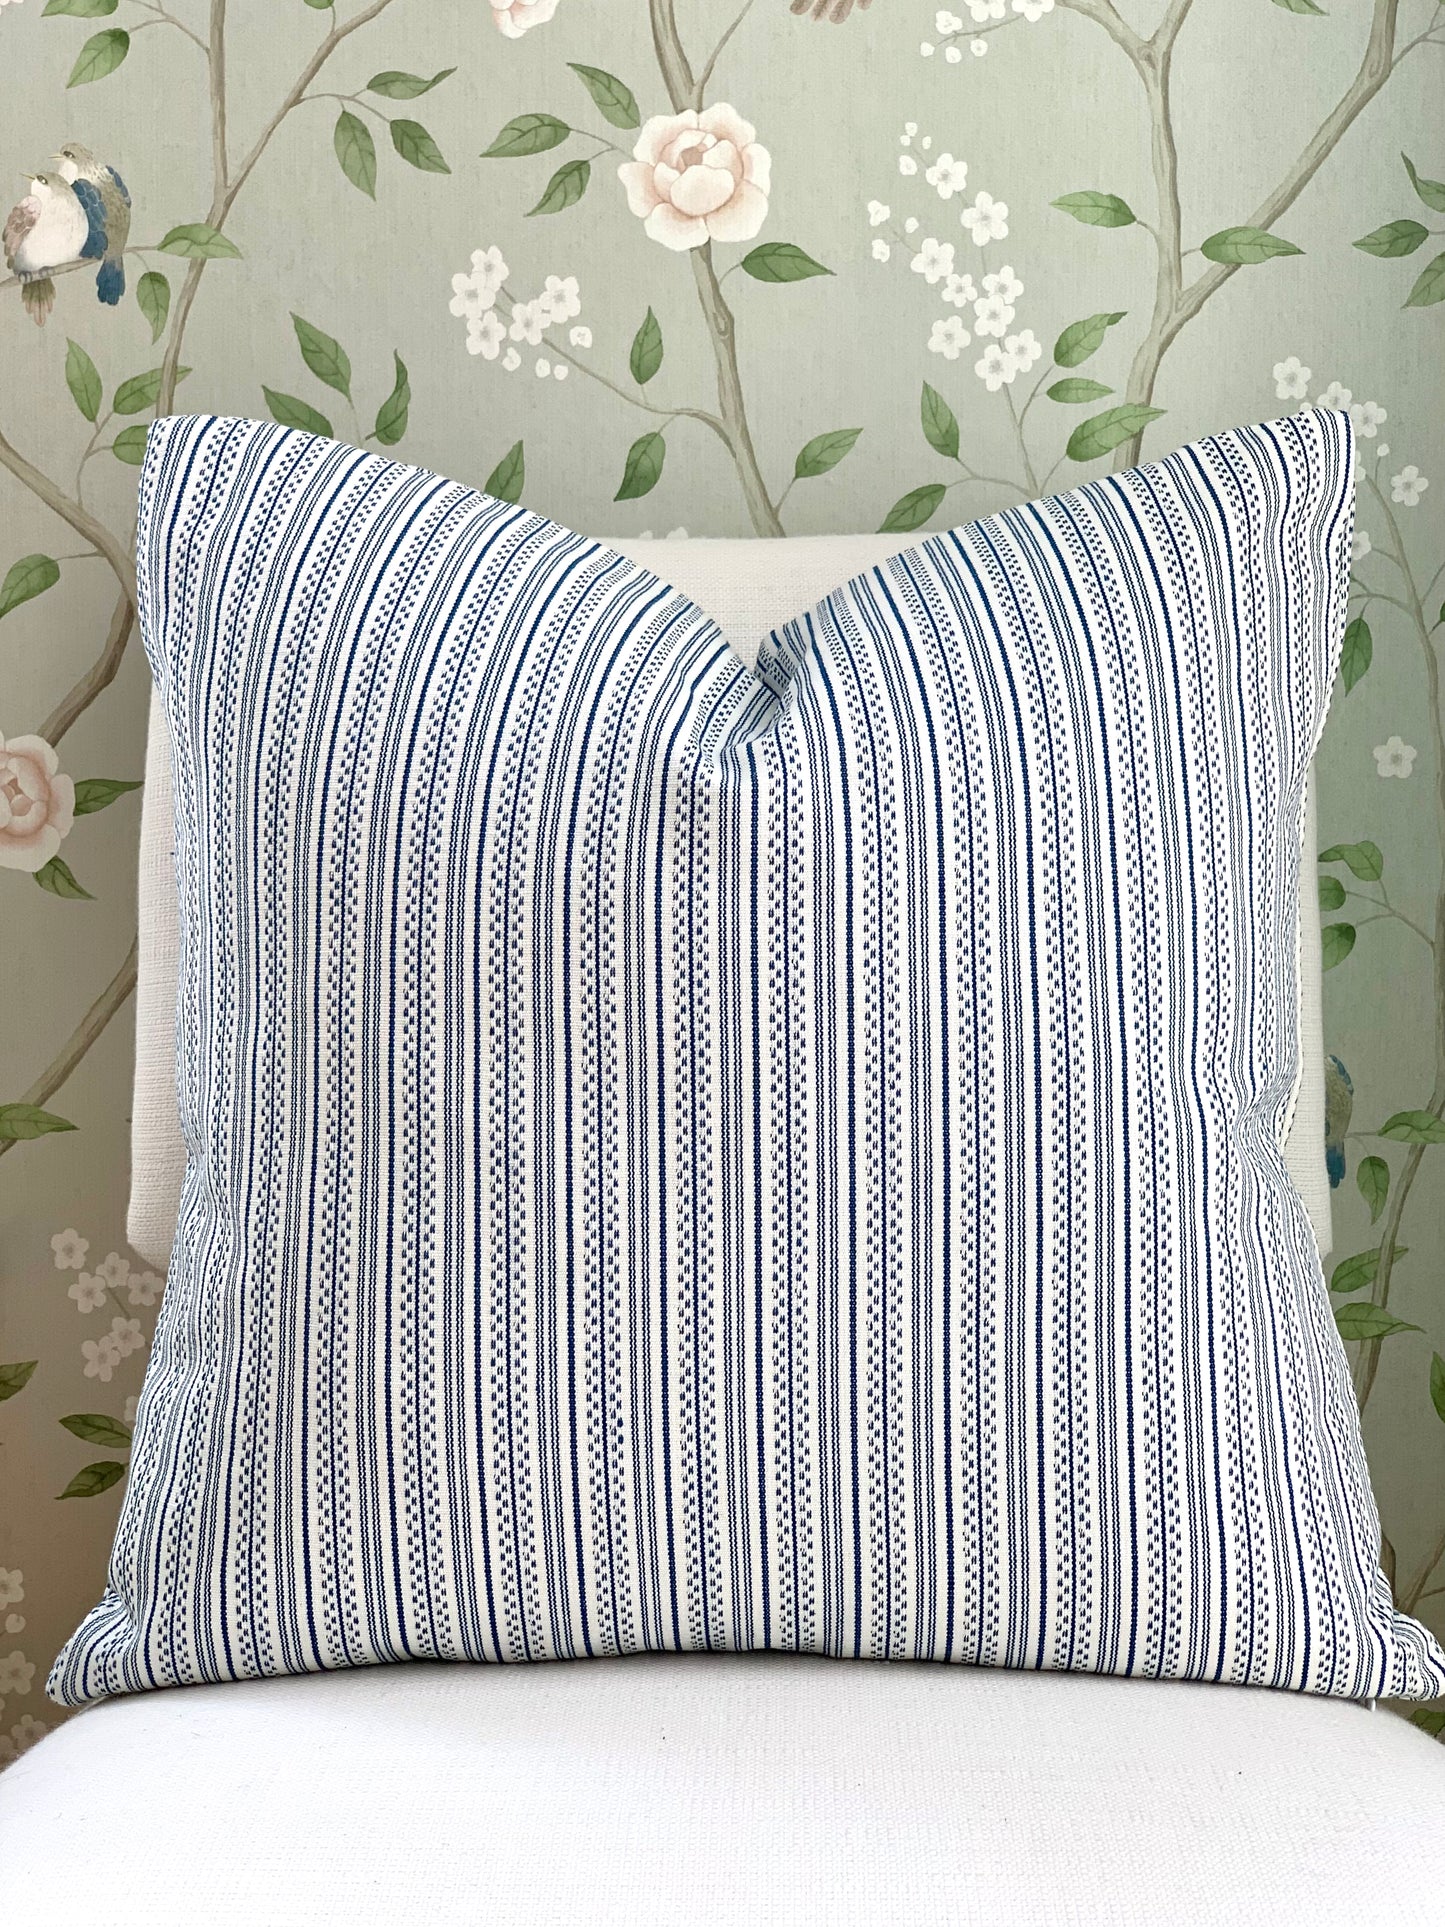 Blue and White Striped Pillow Cover - Navy